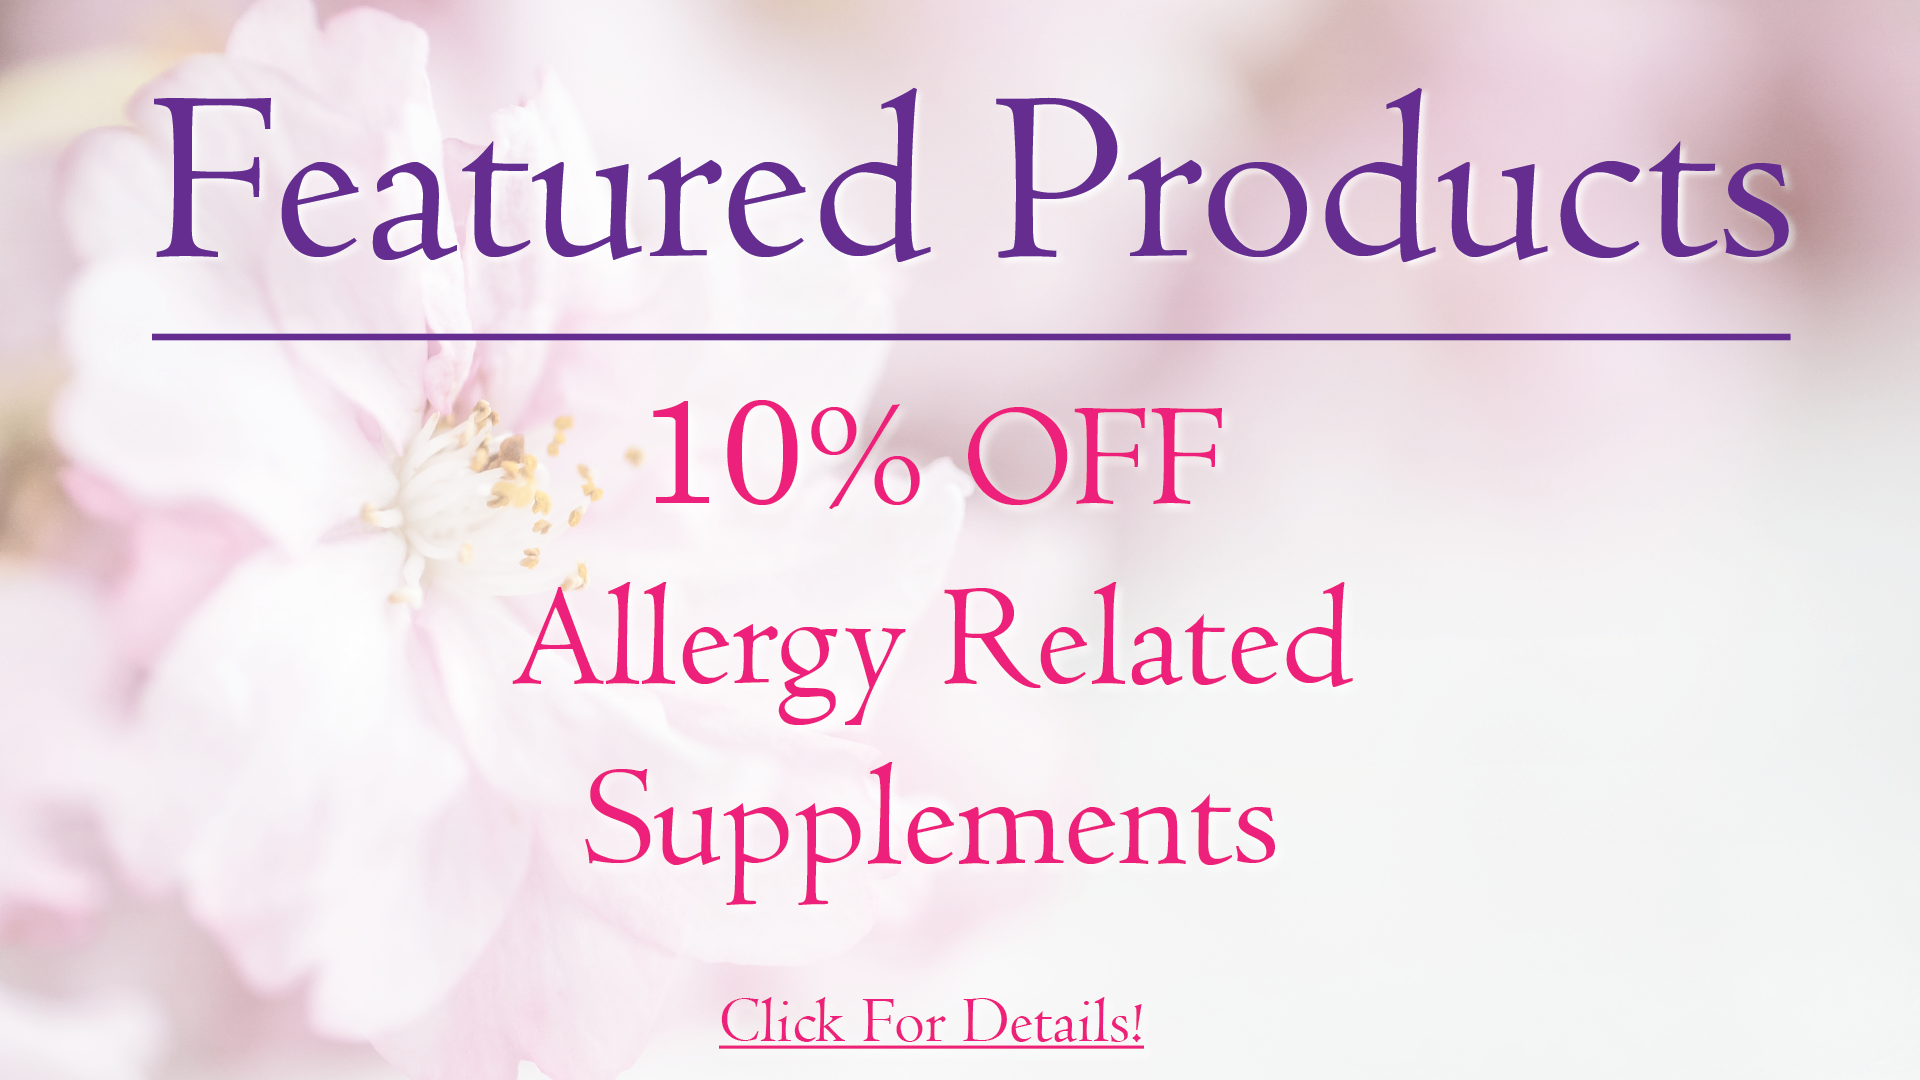 Featured Products - 10% OFF Allergy Related Products